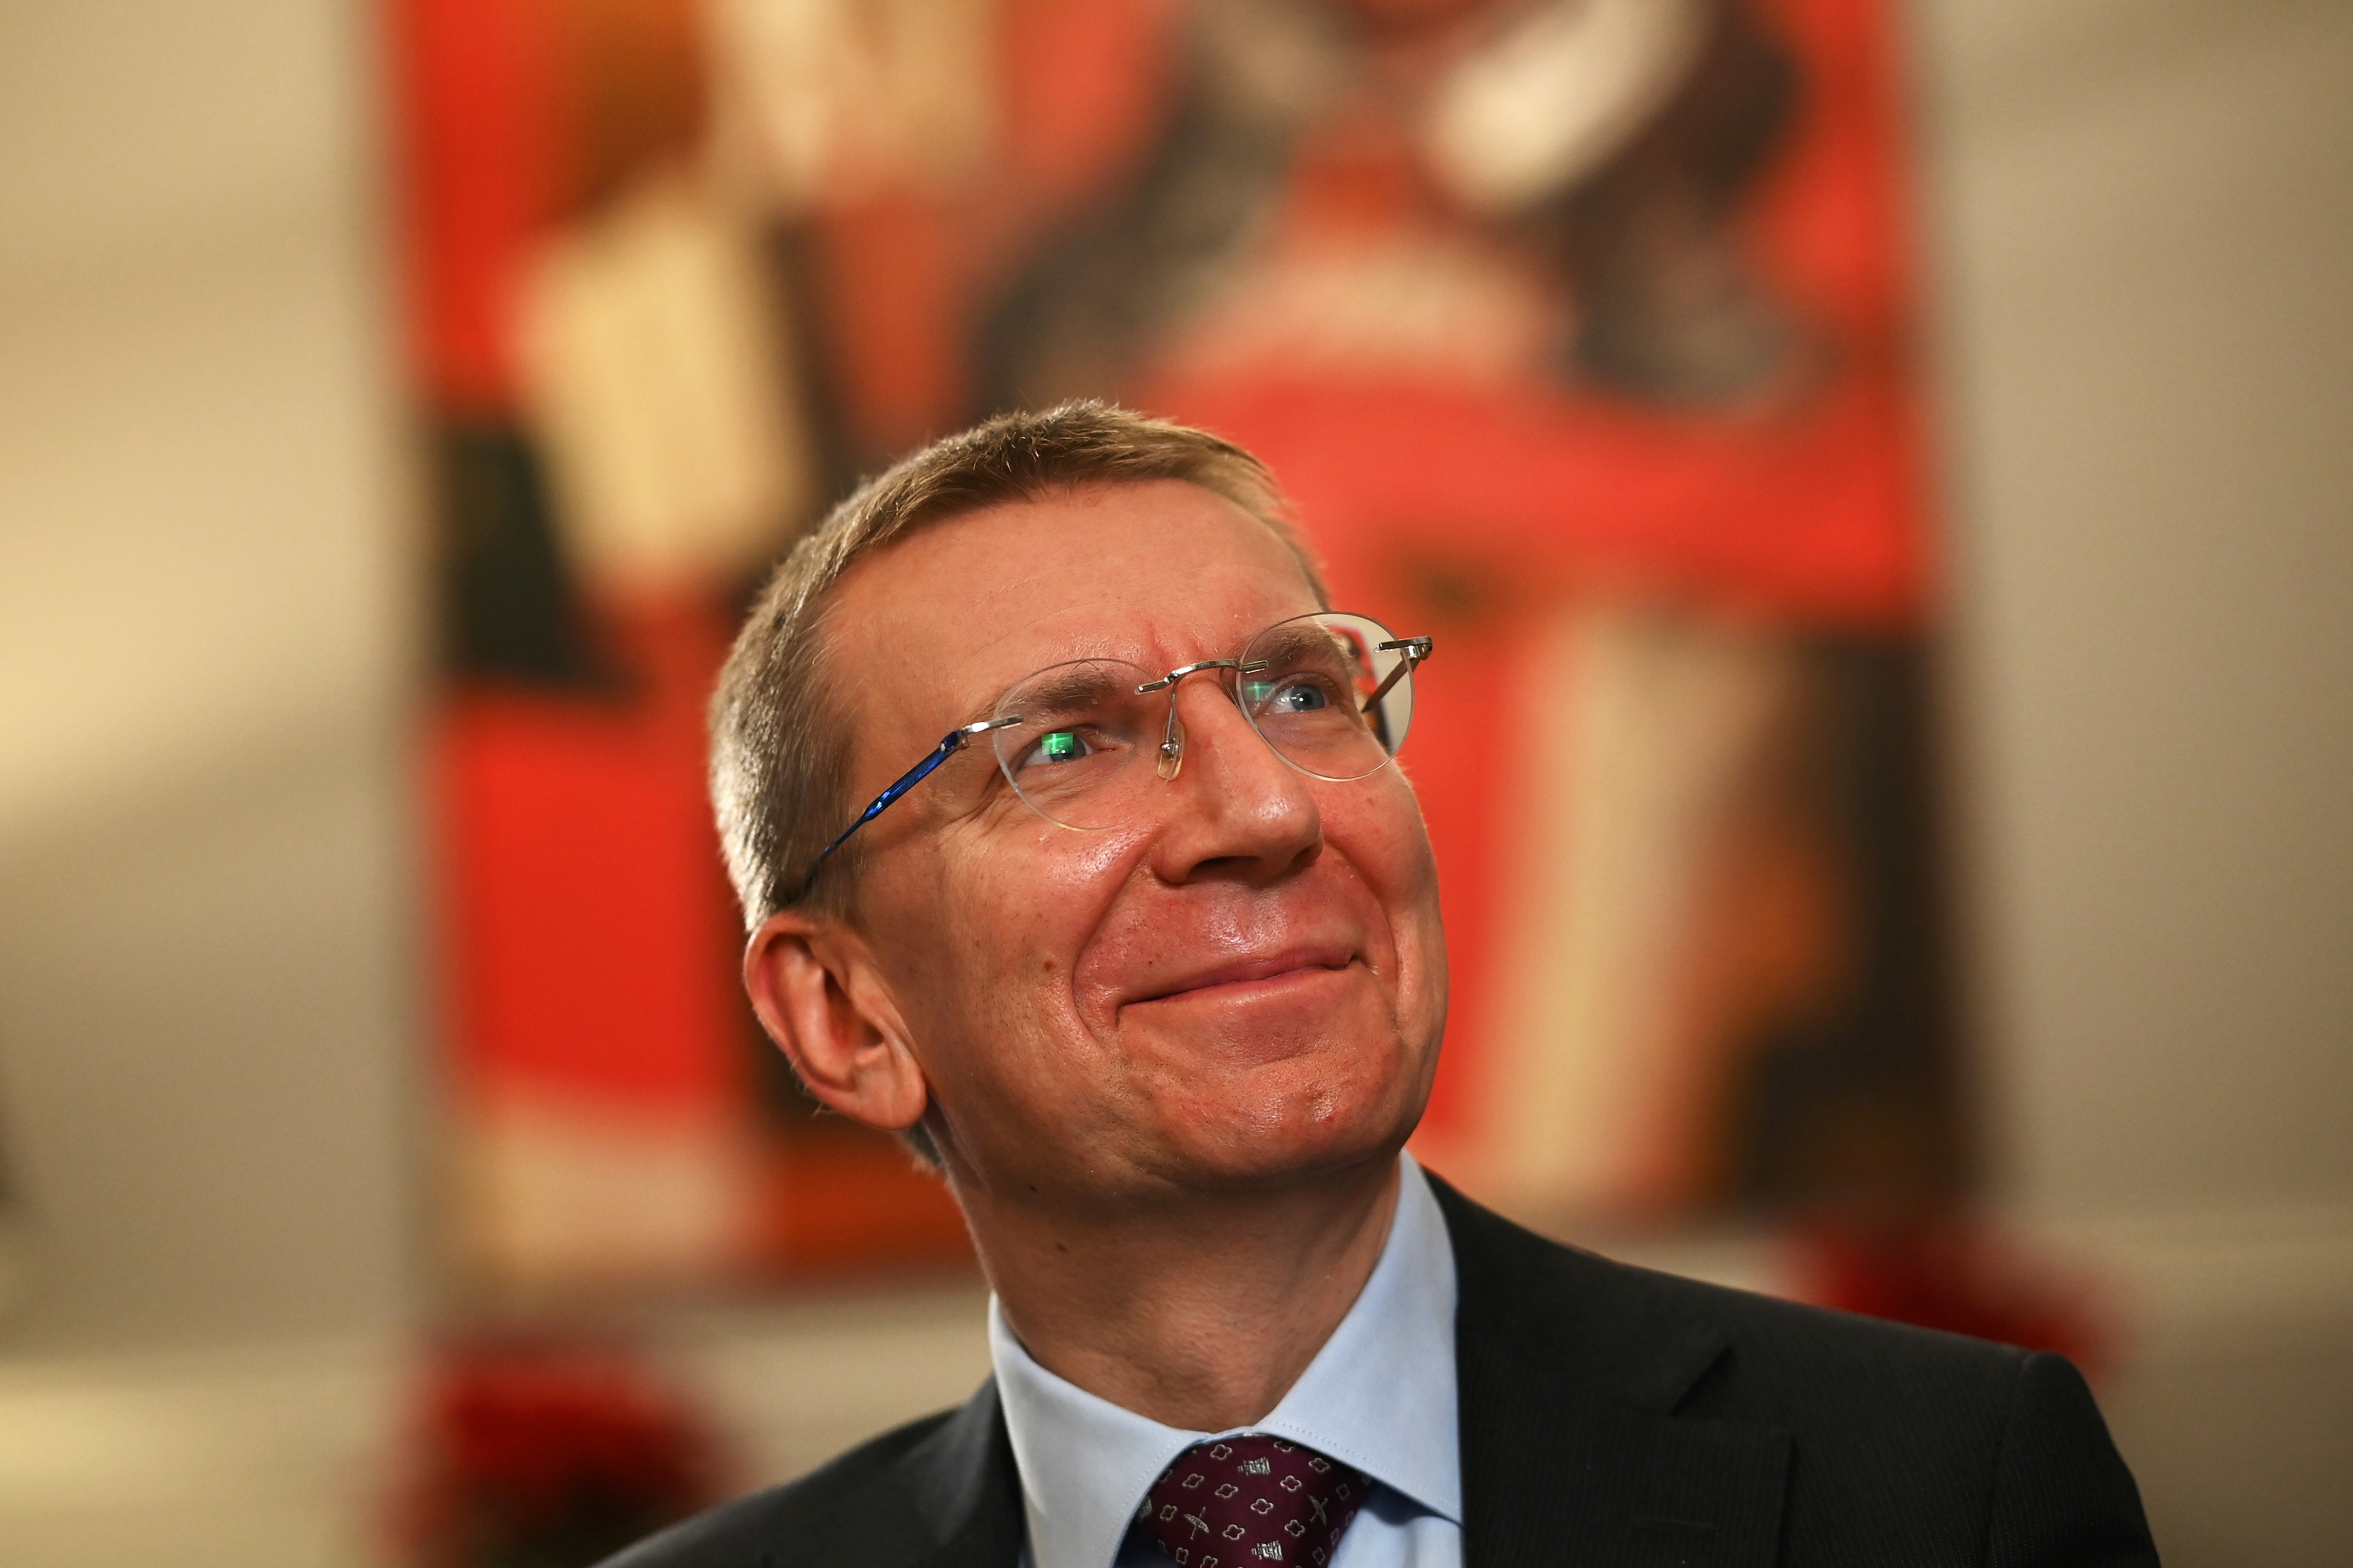 Latvian Foreign Minister Edgars Rinkevics smiles during an interview with Reuters at the Latvian Embassy in London, Britain, December 7, 2021. REUTERS/Dylan Martinez